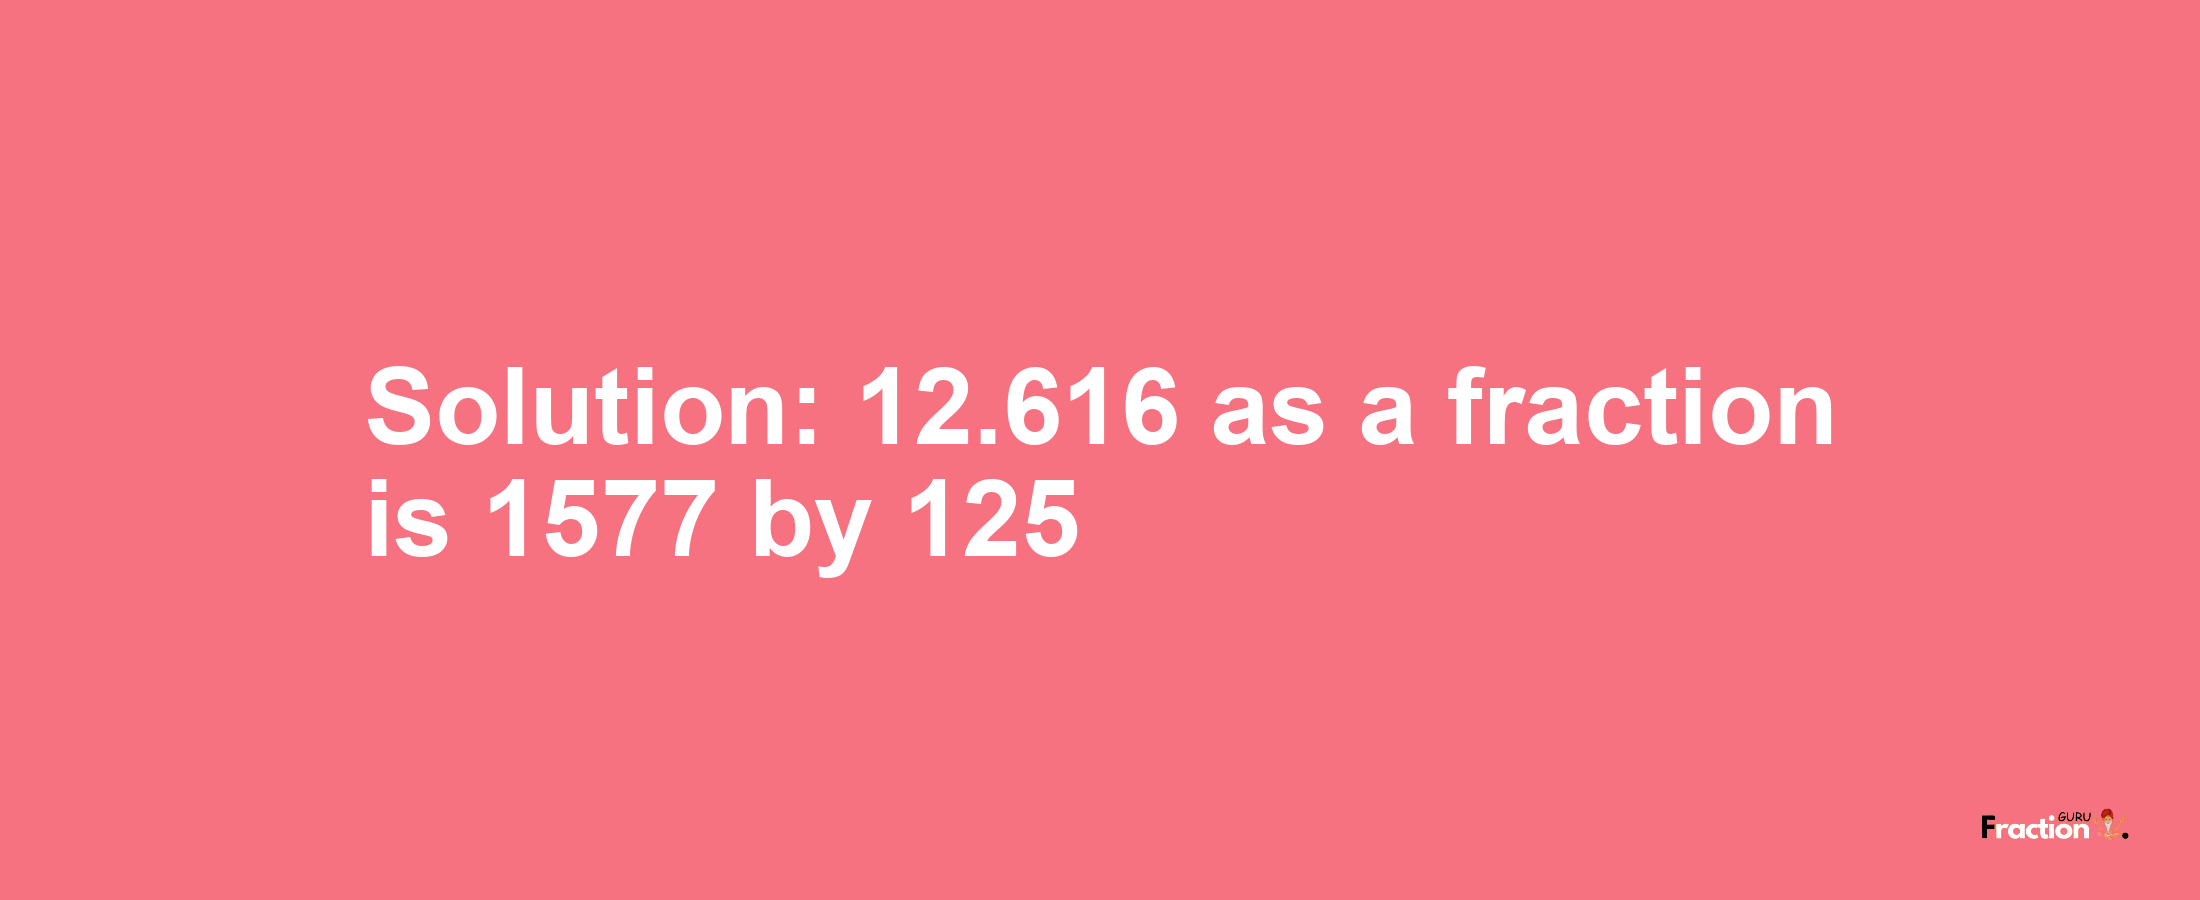 Solution:12.616 as a fraction is 1577/125